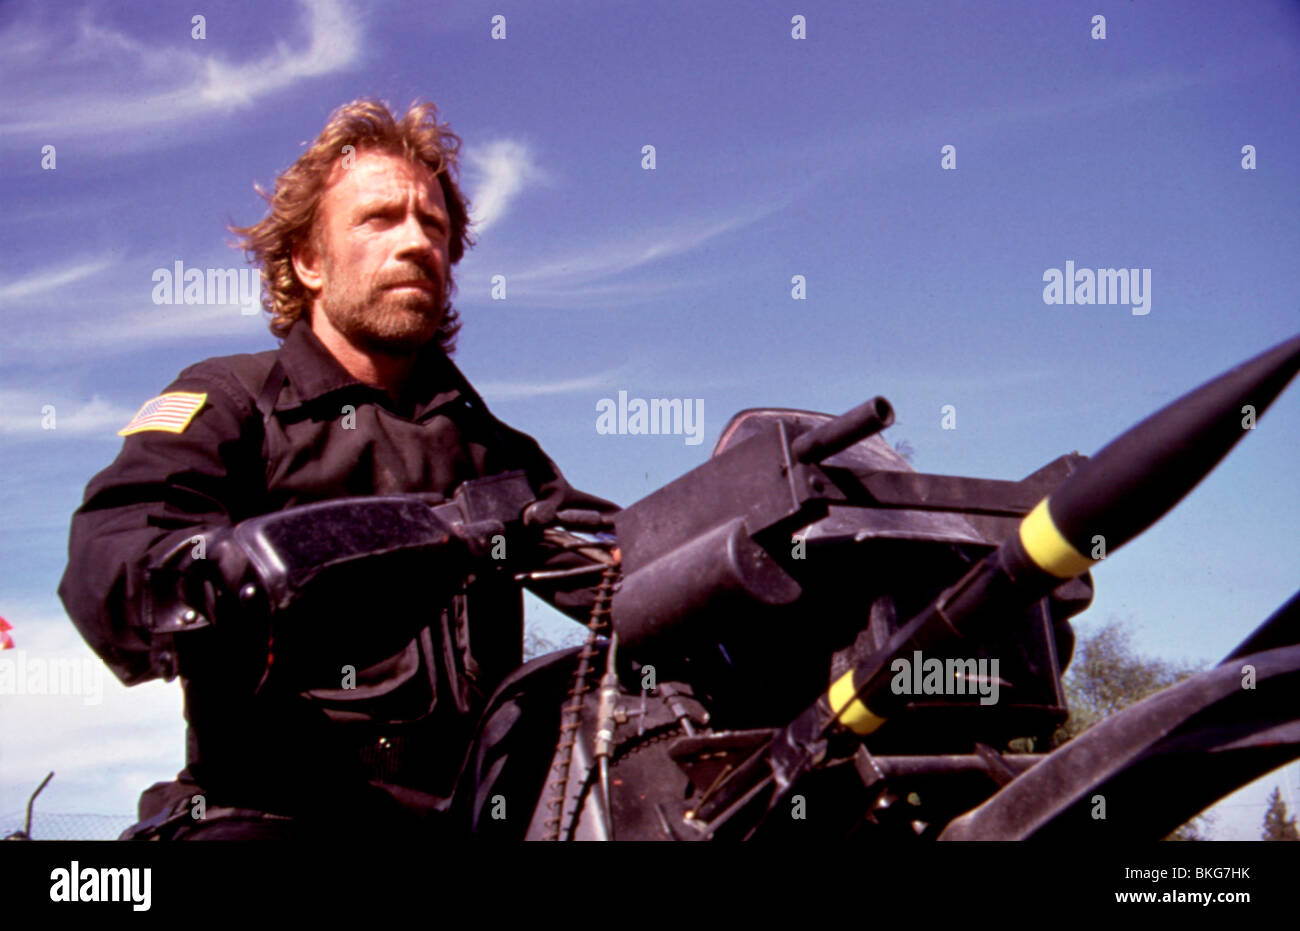 THE DELTA FORCE (1986) CHUCK NORRIS DLF 002 Stock Photo